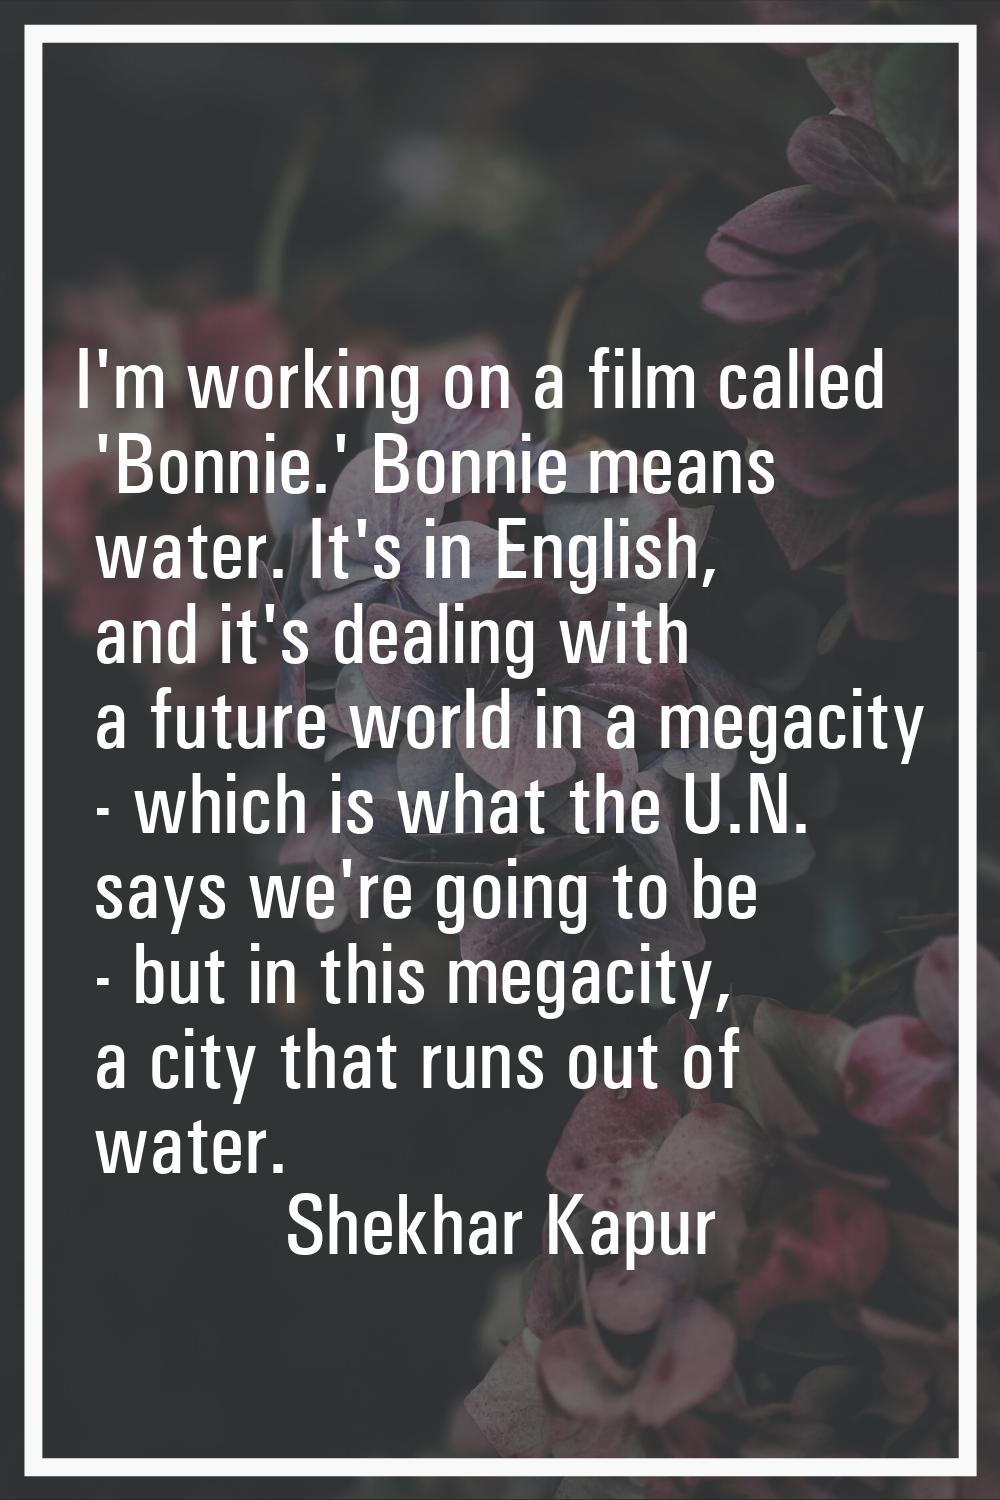 I'm working on a film called 'Bonnie.' Bonnie means water. It's in English, and it's dealing with a